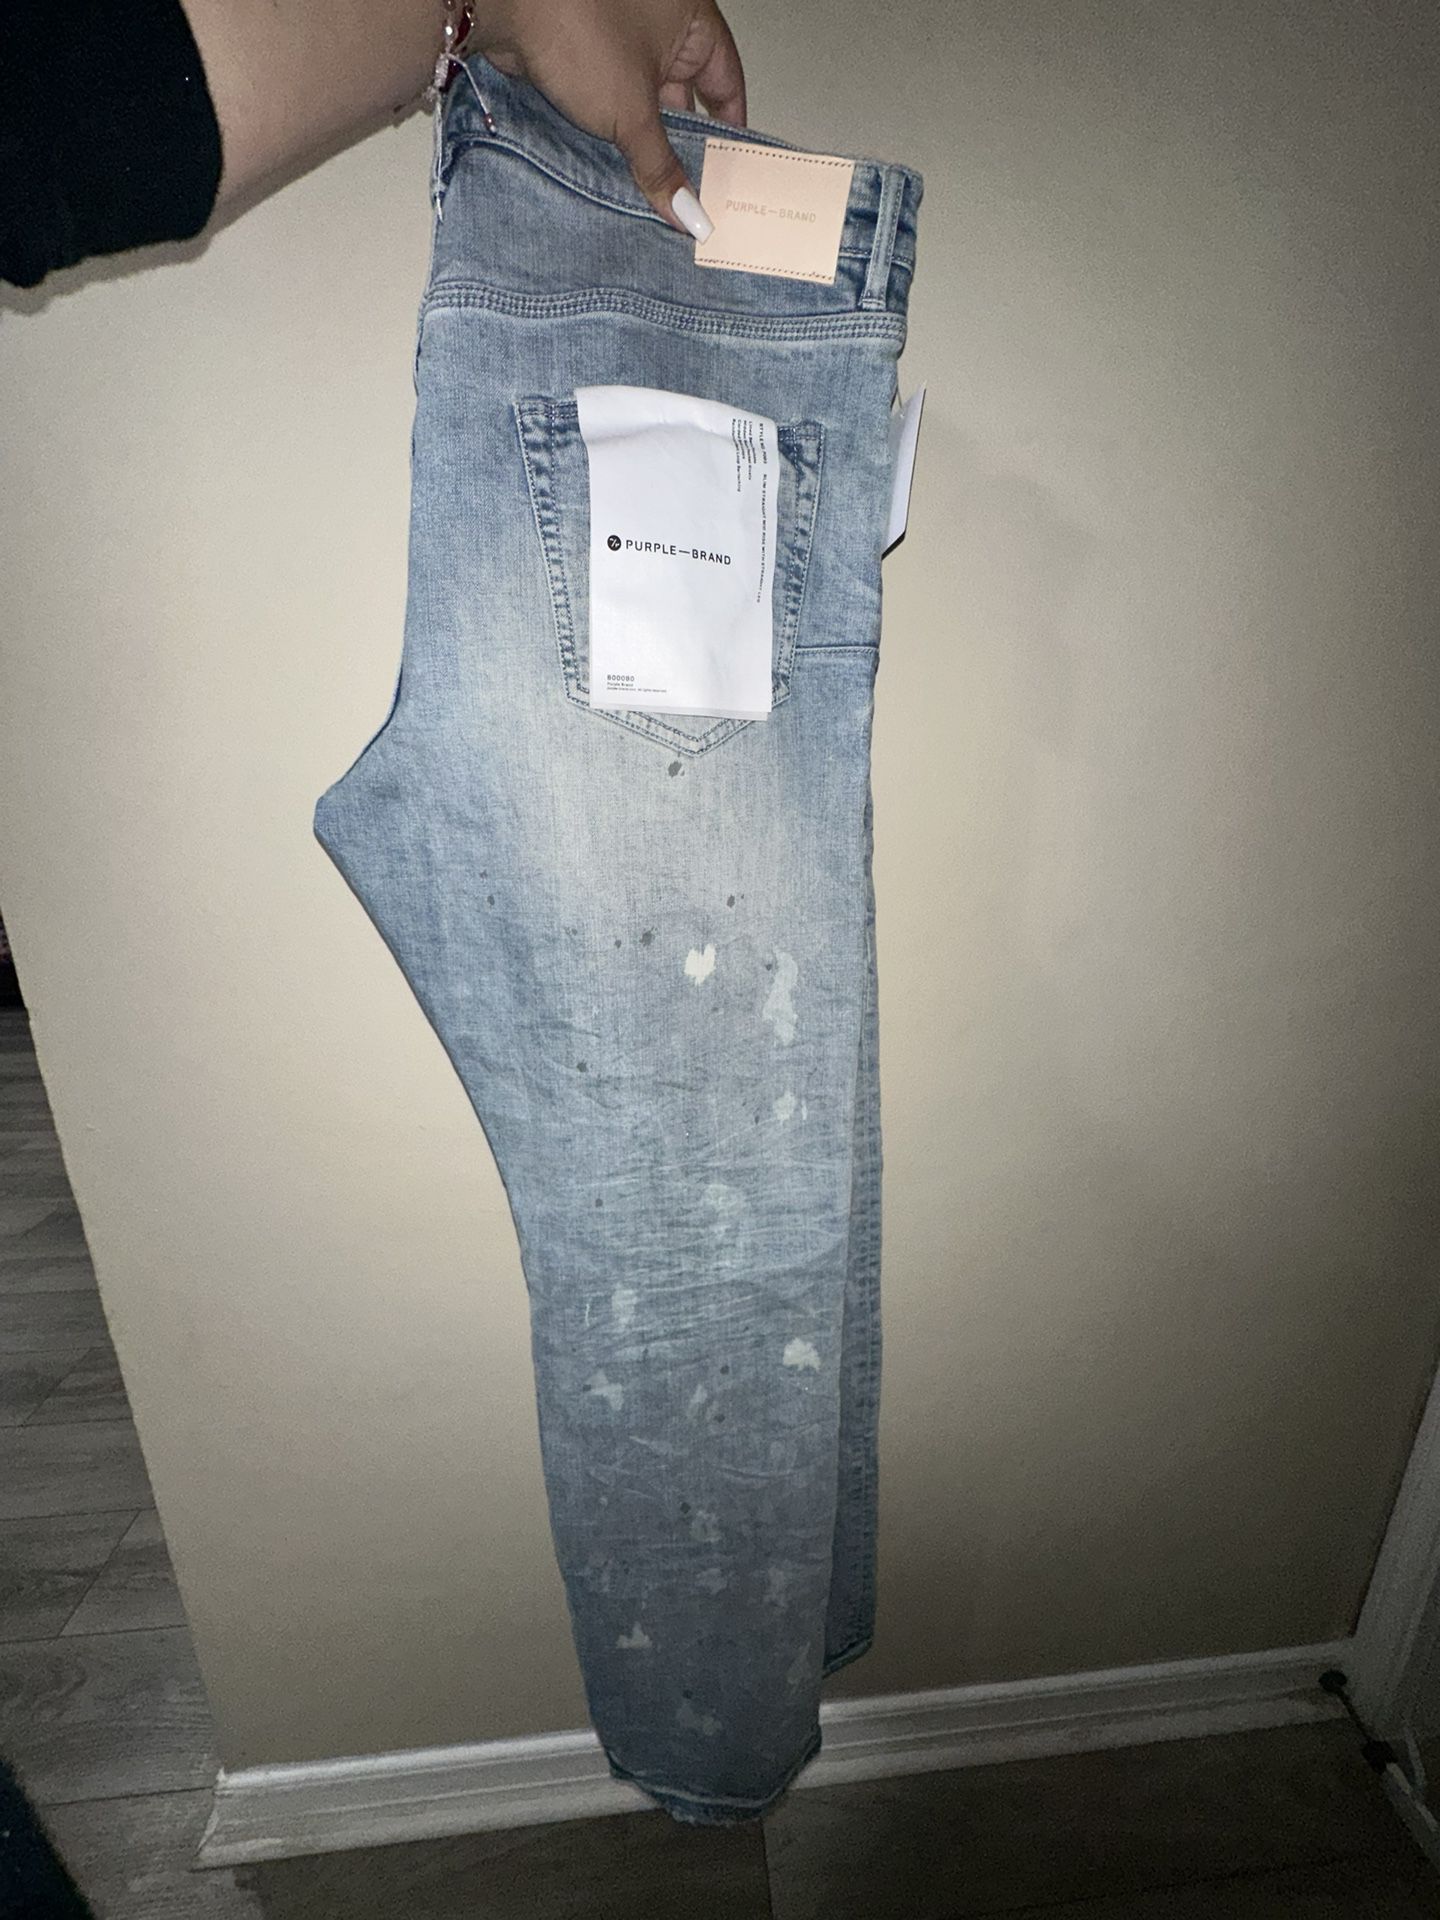 Purple Brand Jeans Size 36 for Sale in Huntington Park, CA - OfferUp